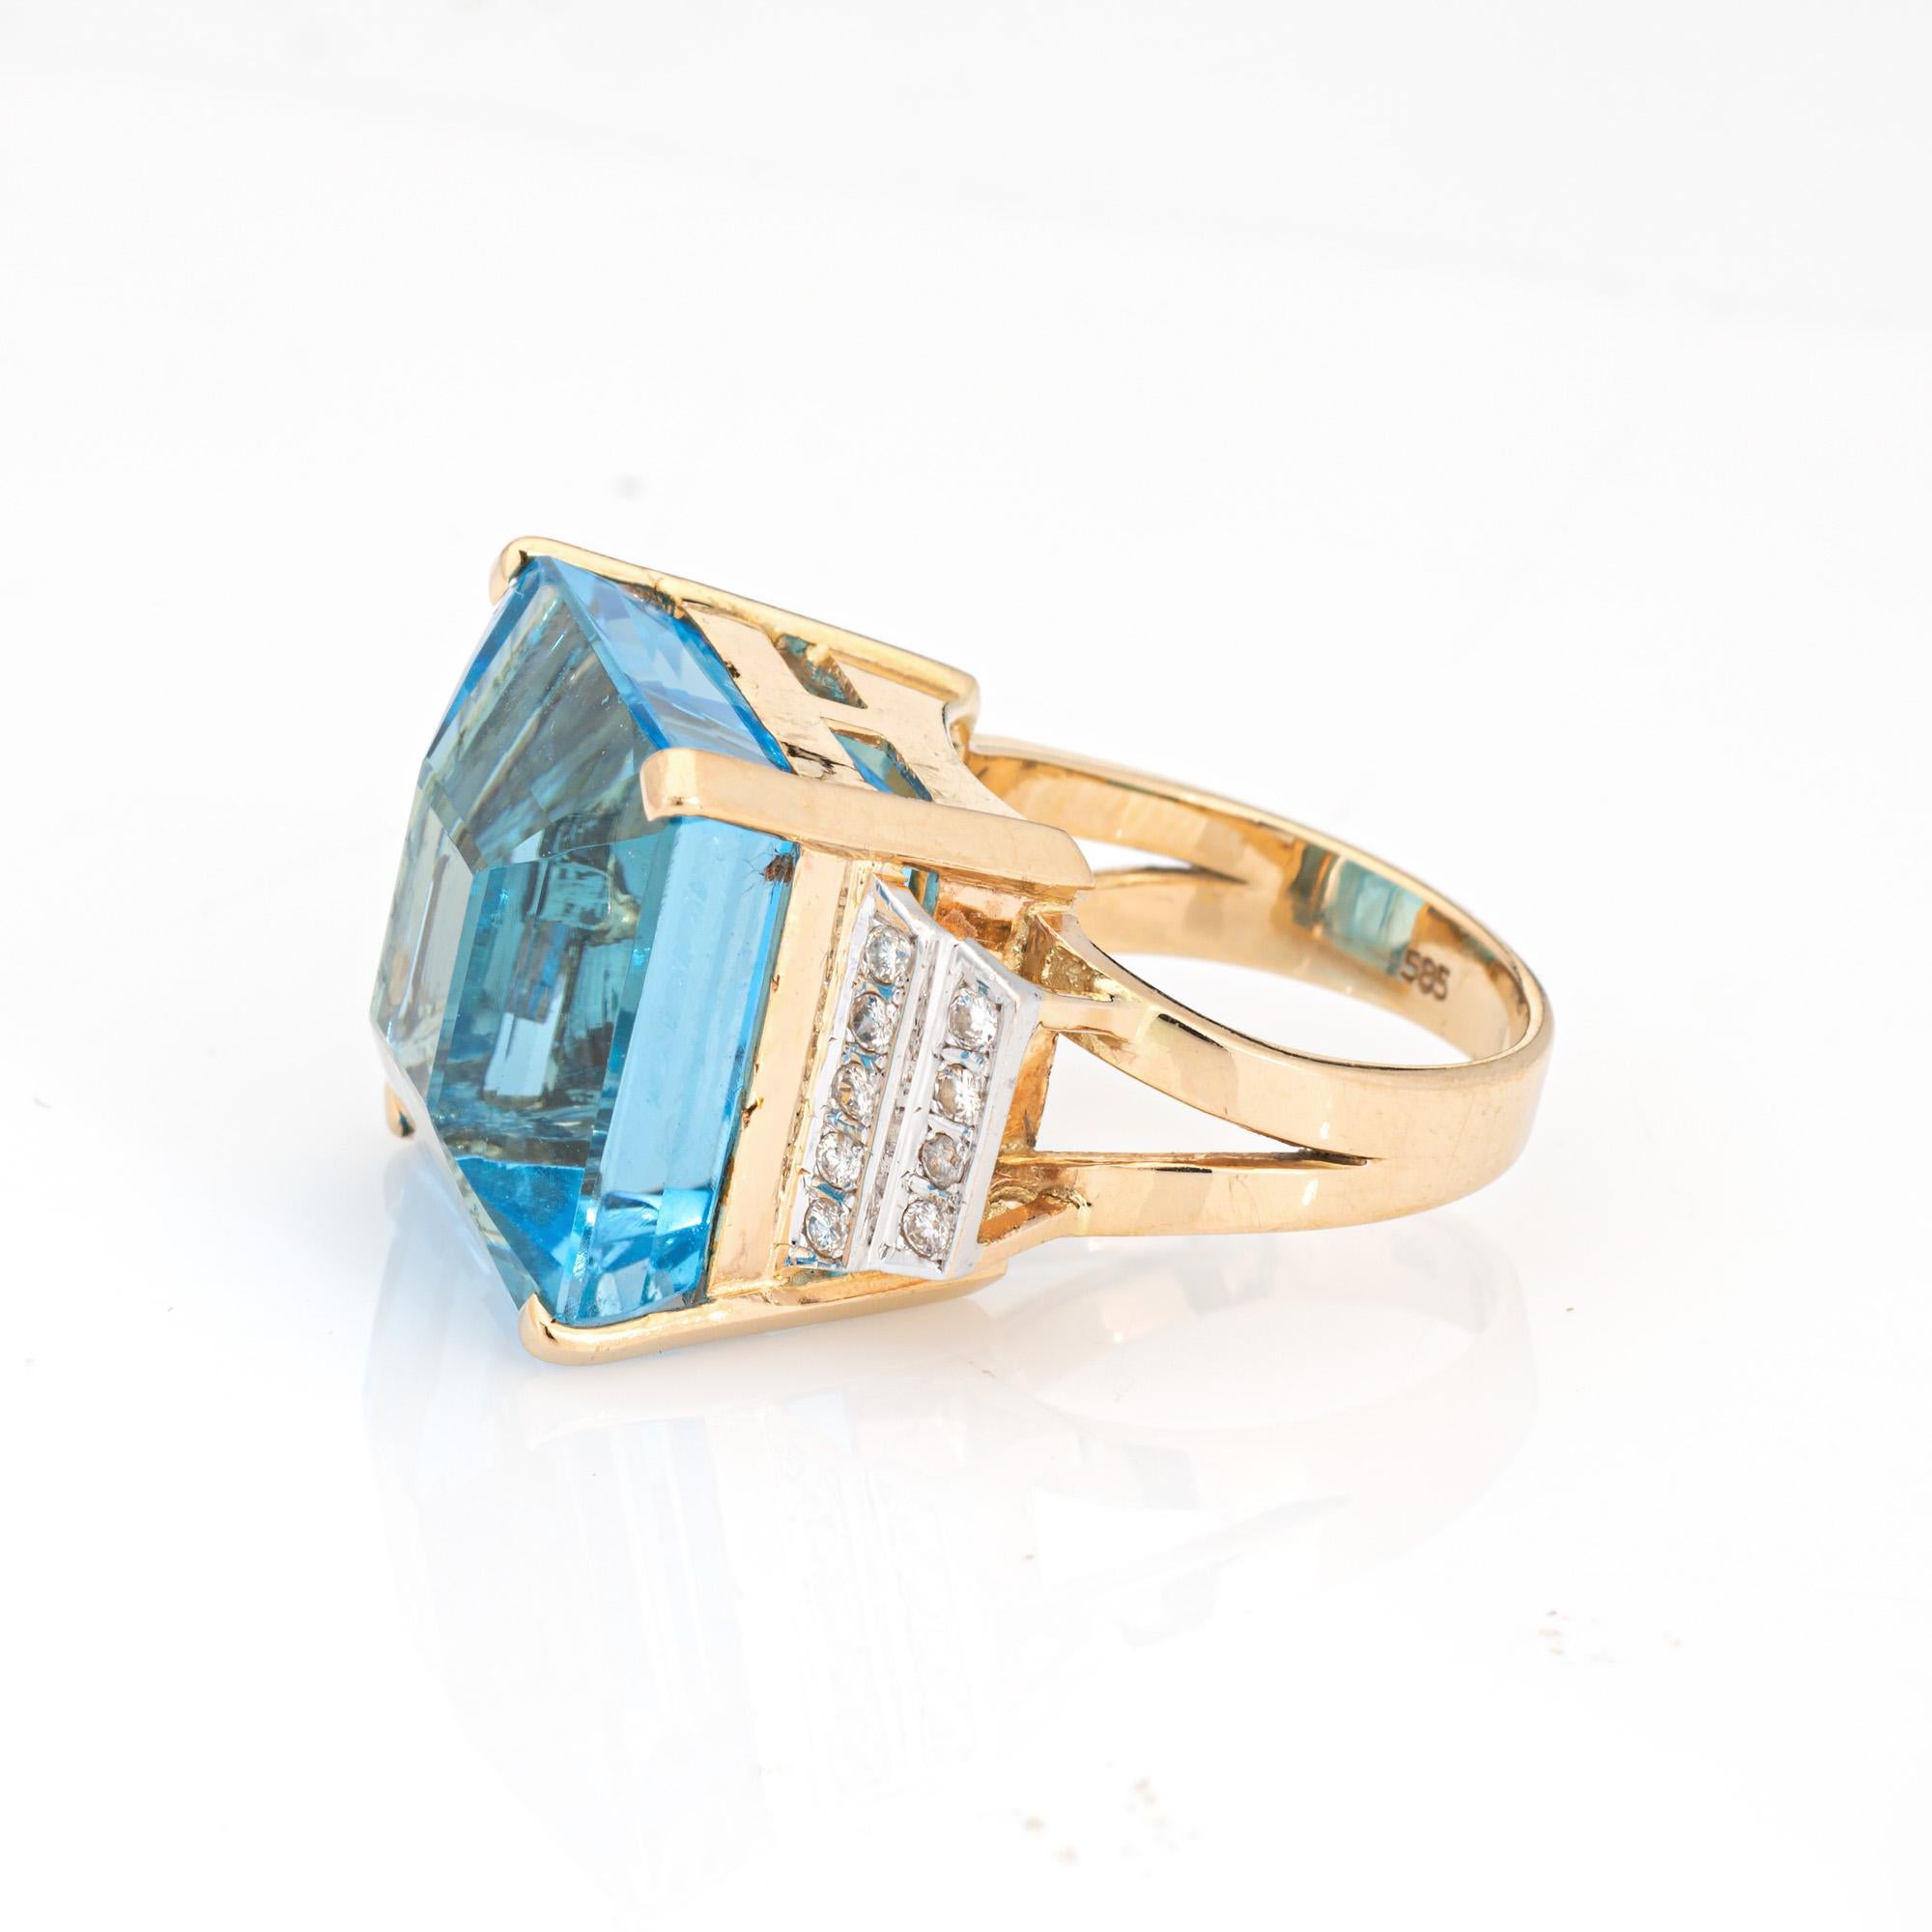 Emerald Cut 35ct Blue Topaz Diamond Ring Vintage 14k Yellow Gold Large Cocktail Jewelry Sz 7 For Sale